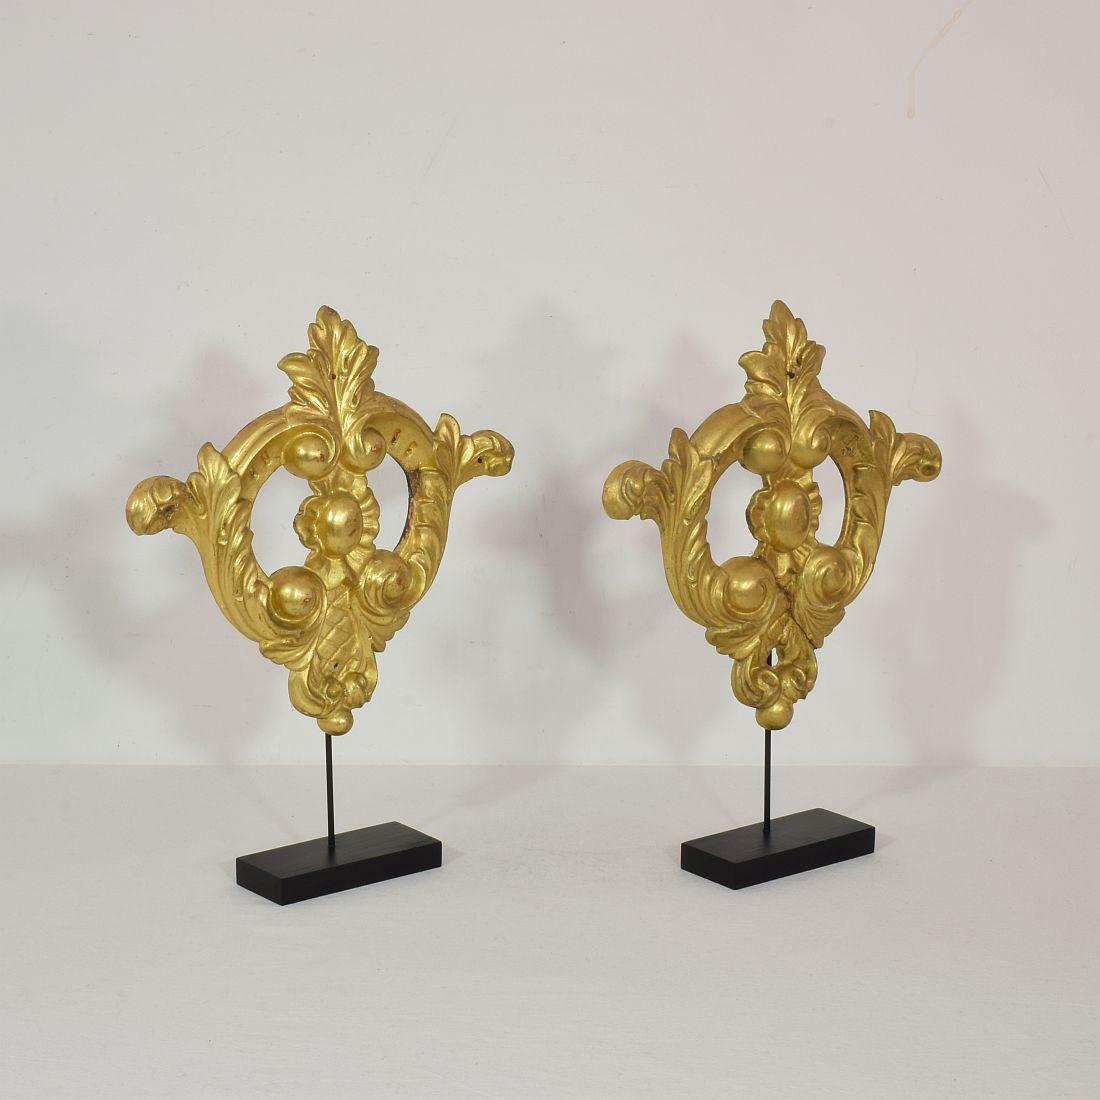 Baroque Pair of 19th Century Italian Carved Giltwood Ornaments